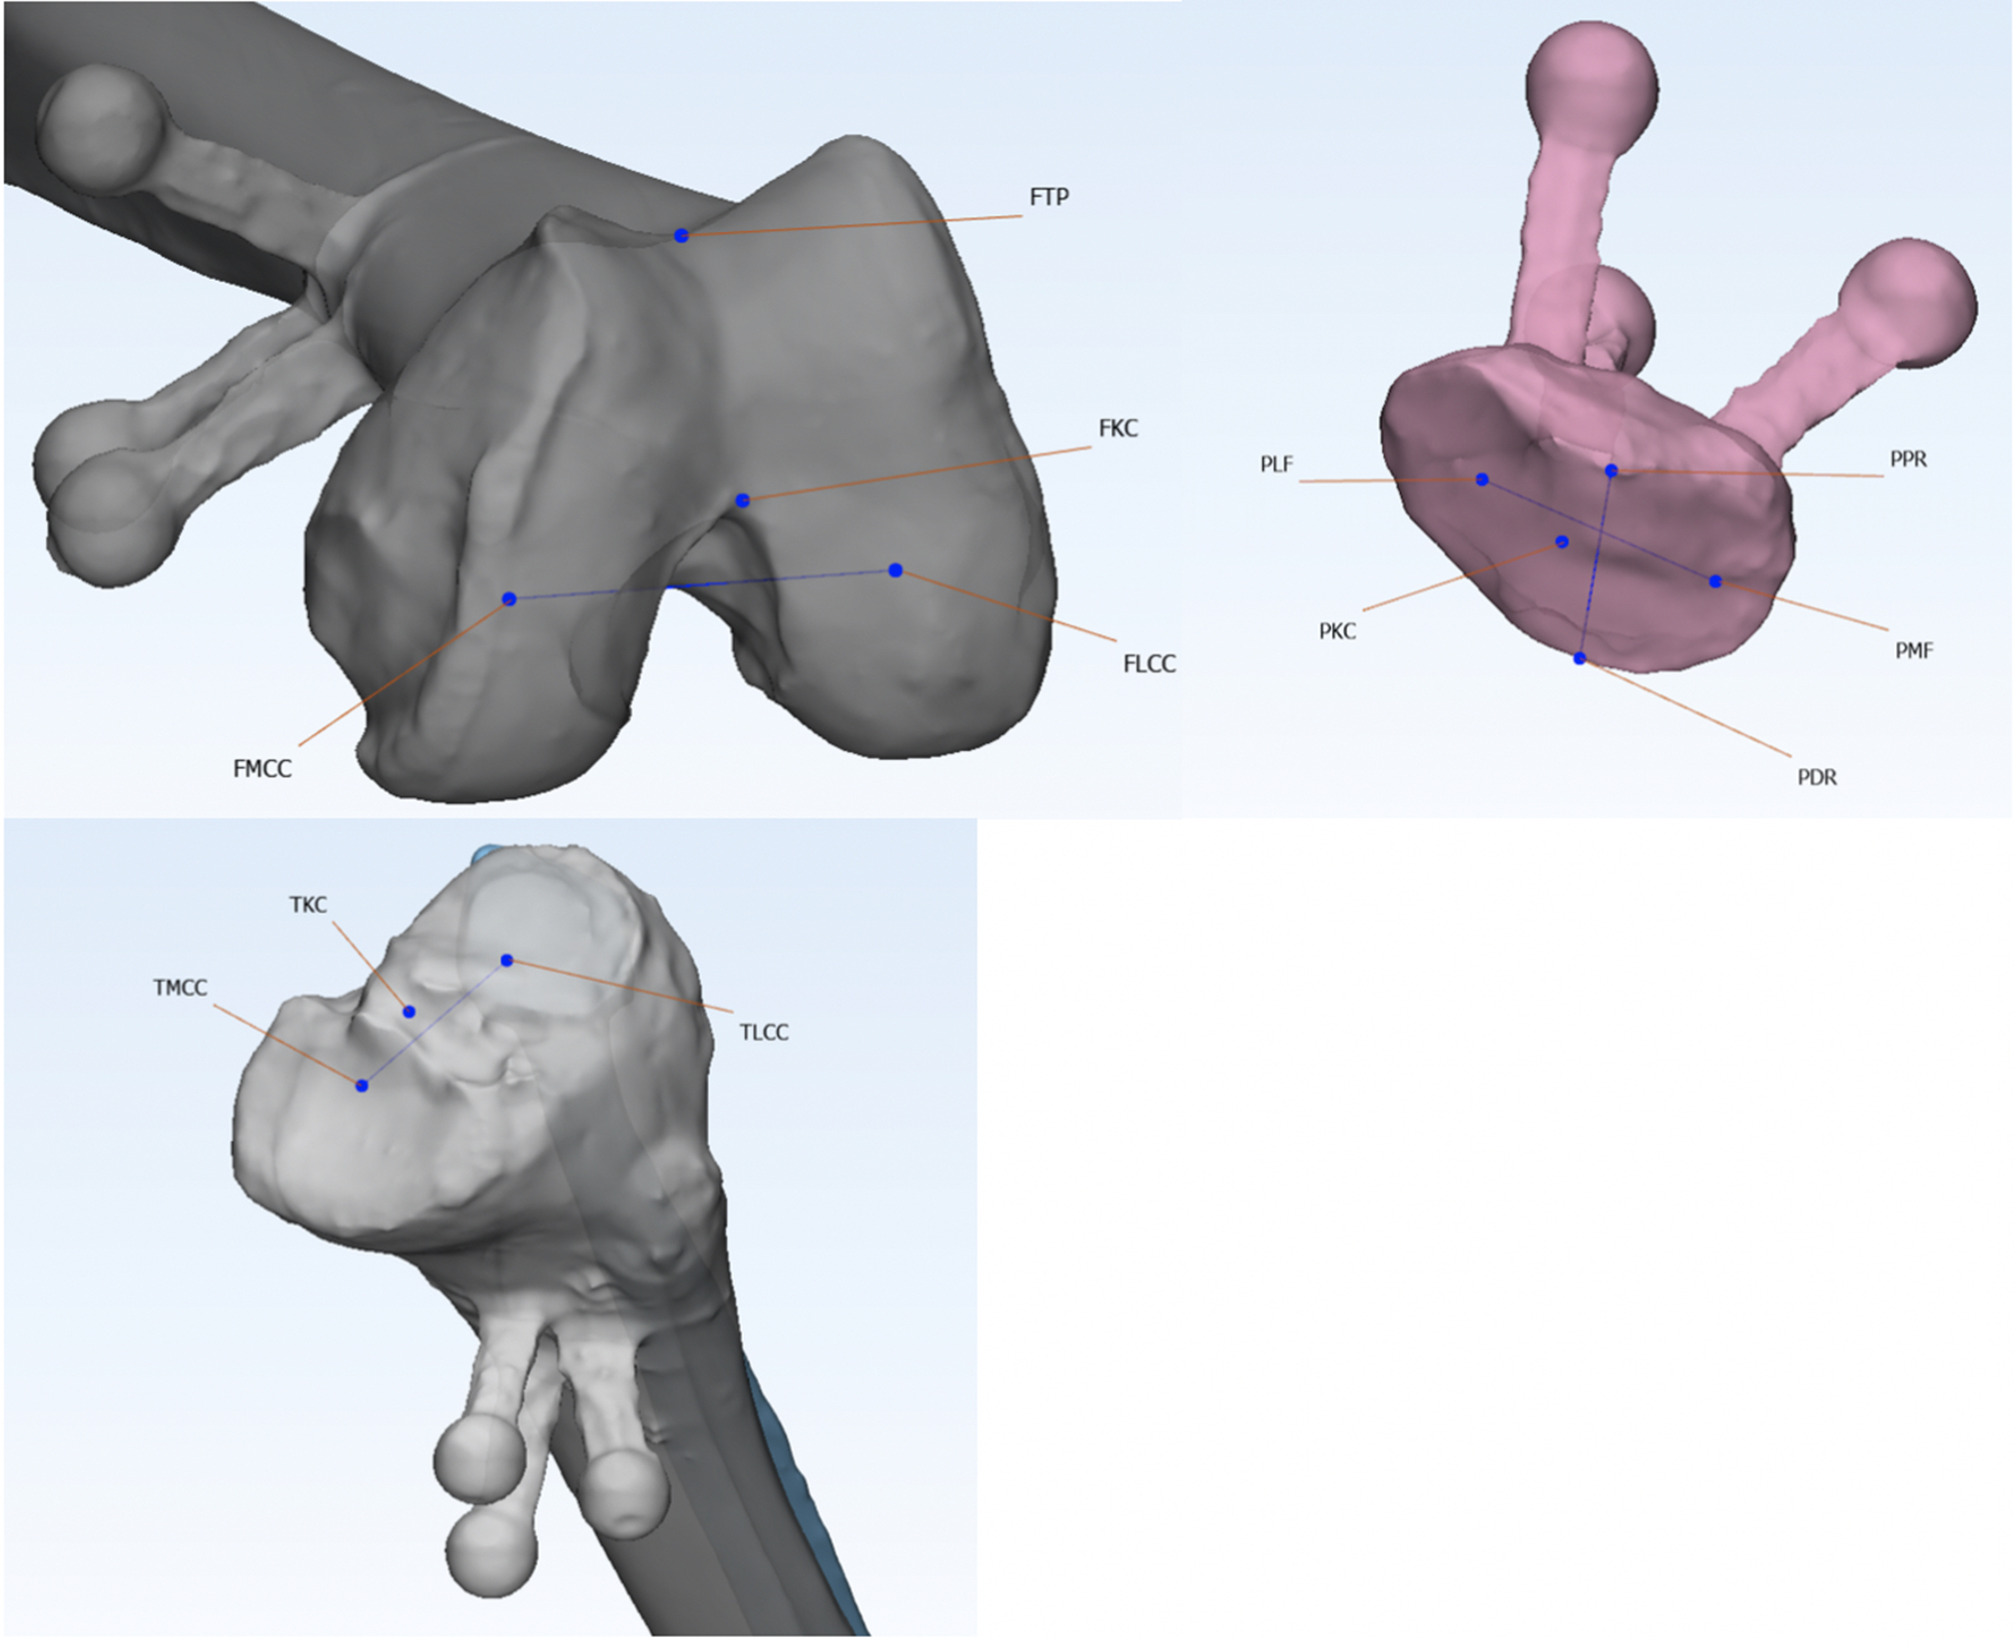 Fig. 3 
            Femoral, tibial, and patellar landmarks: In a clockwise direction, the 3D reconstructions of the femur, patella, and tibia are shown. FKC, centre of the intertrochlear notch; FLCC, centre of the lateral femoral condyle; FMCC, centre of the medial femoral condyle; FTP, deepest point of the trochlea groove; PDR, most distal point of patella's ridge; PKC, centre of the patella; PPR, most proximal point of patella's ridge; TLCC, centre of the lateral tibia plateau; TMCC, centre of the medial tibia plateau.
          